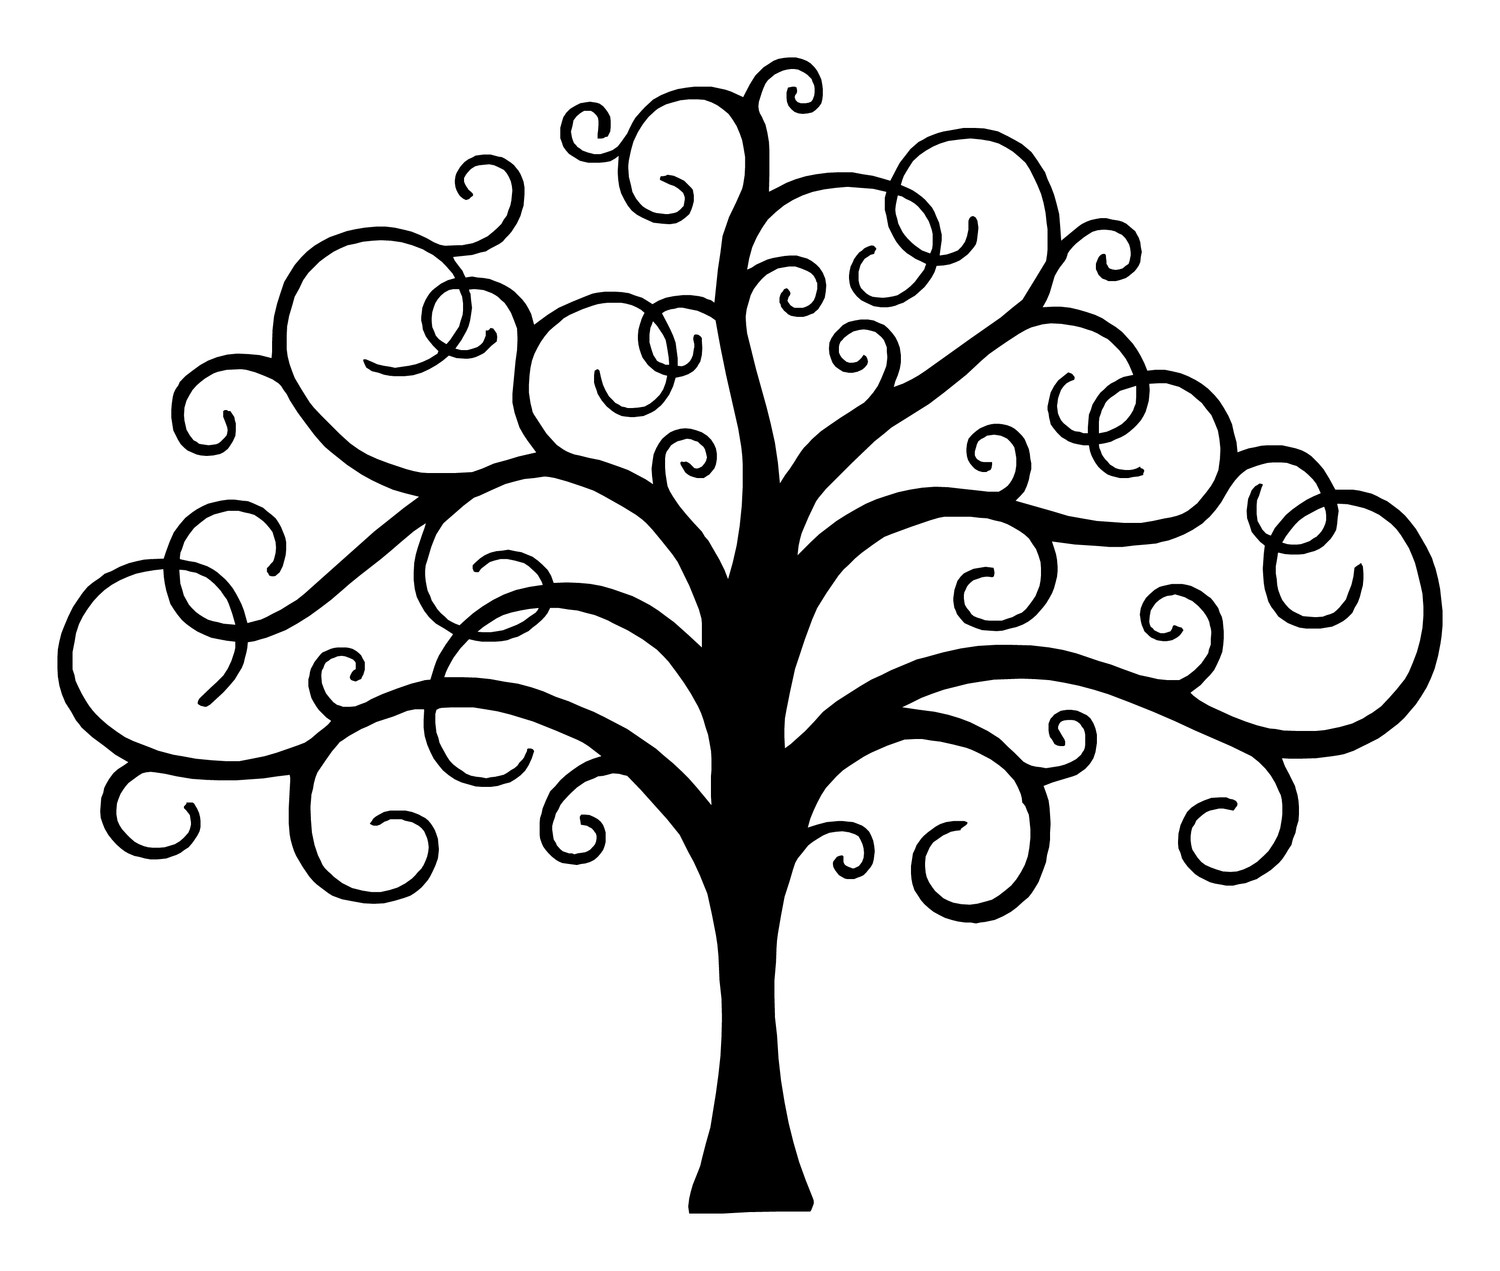 ... Free clipart images tree 